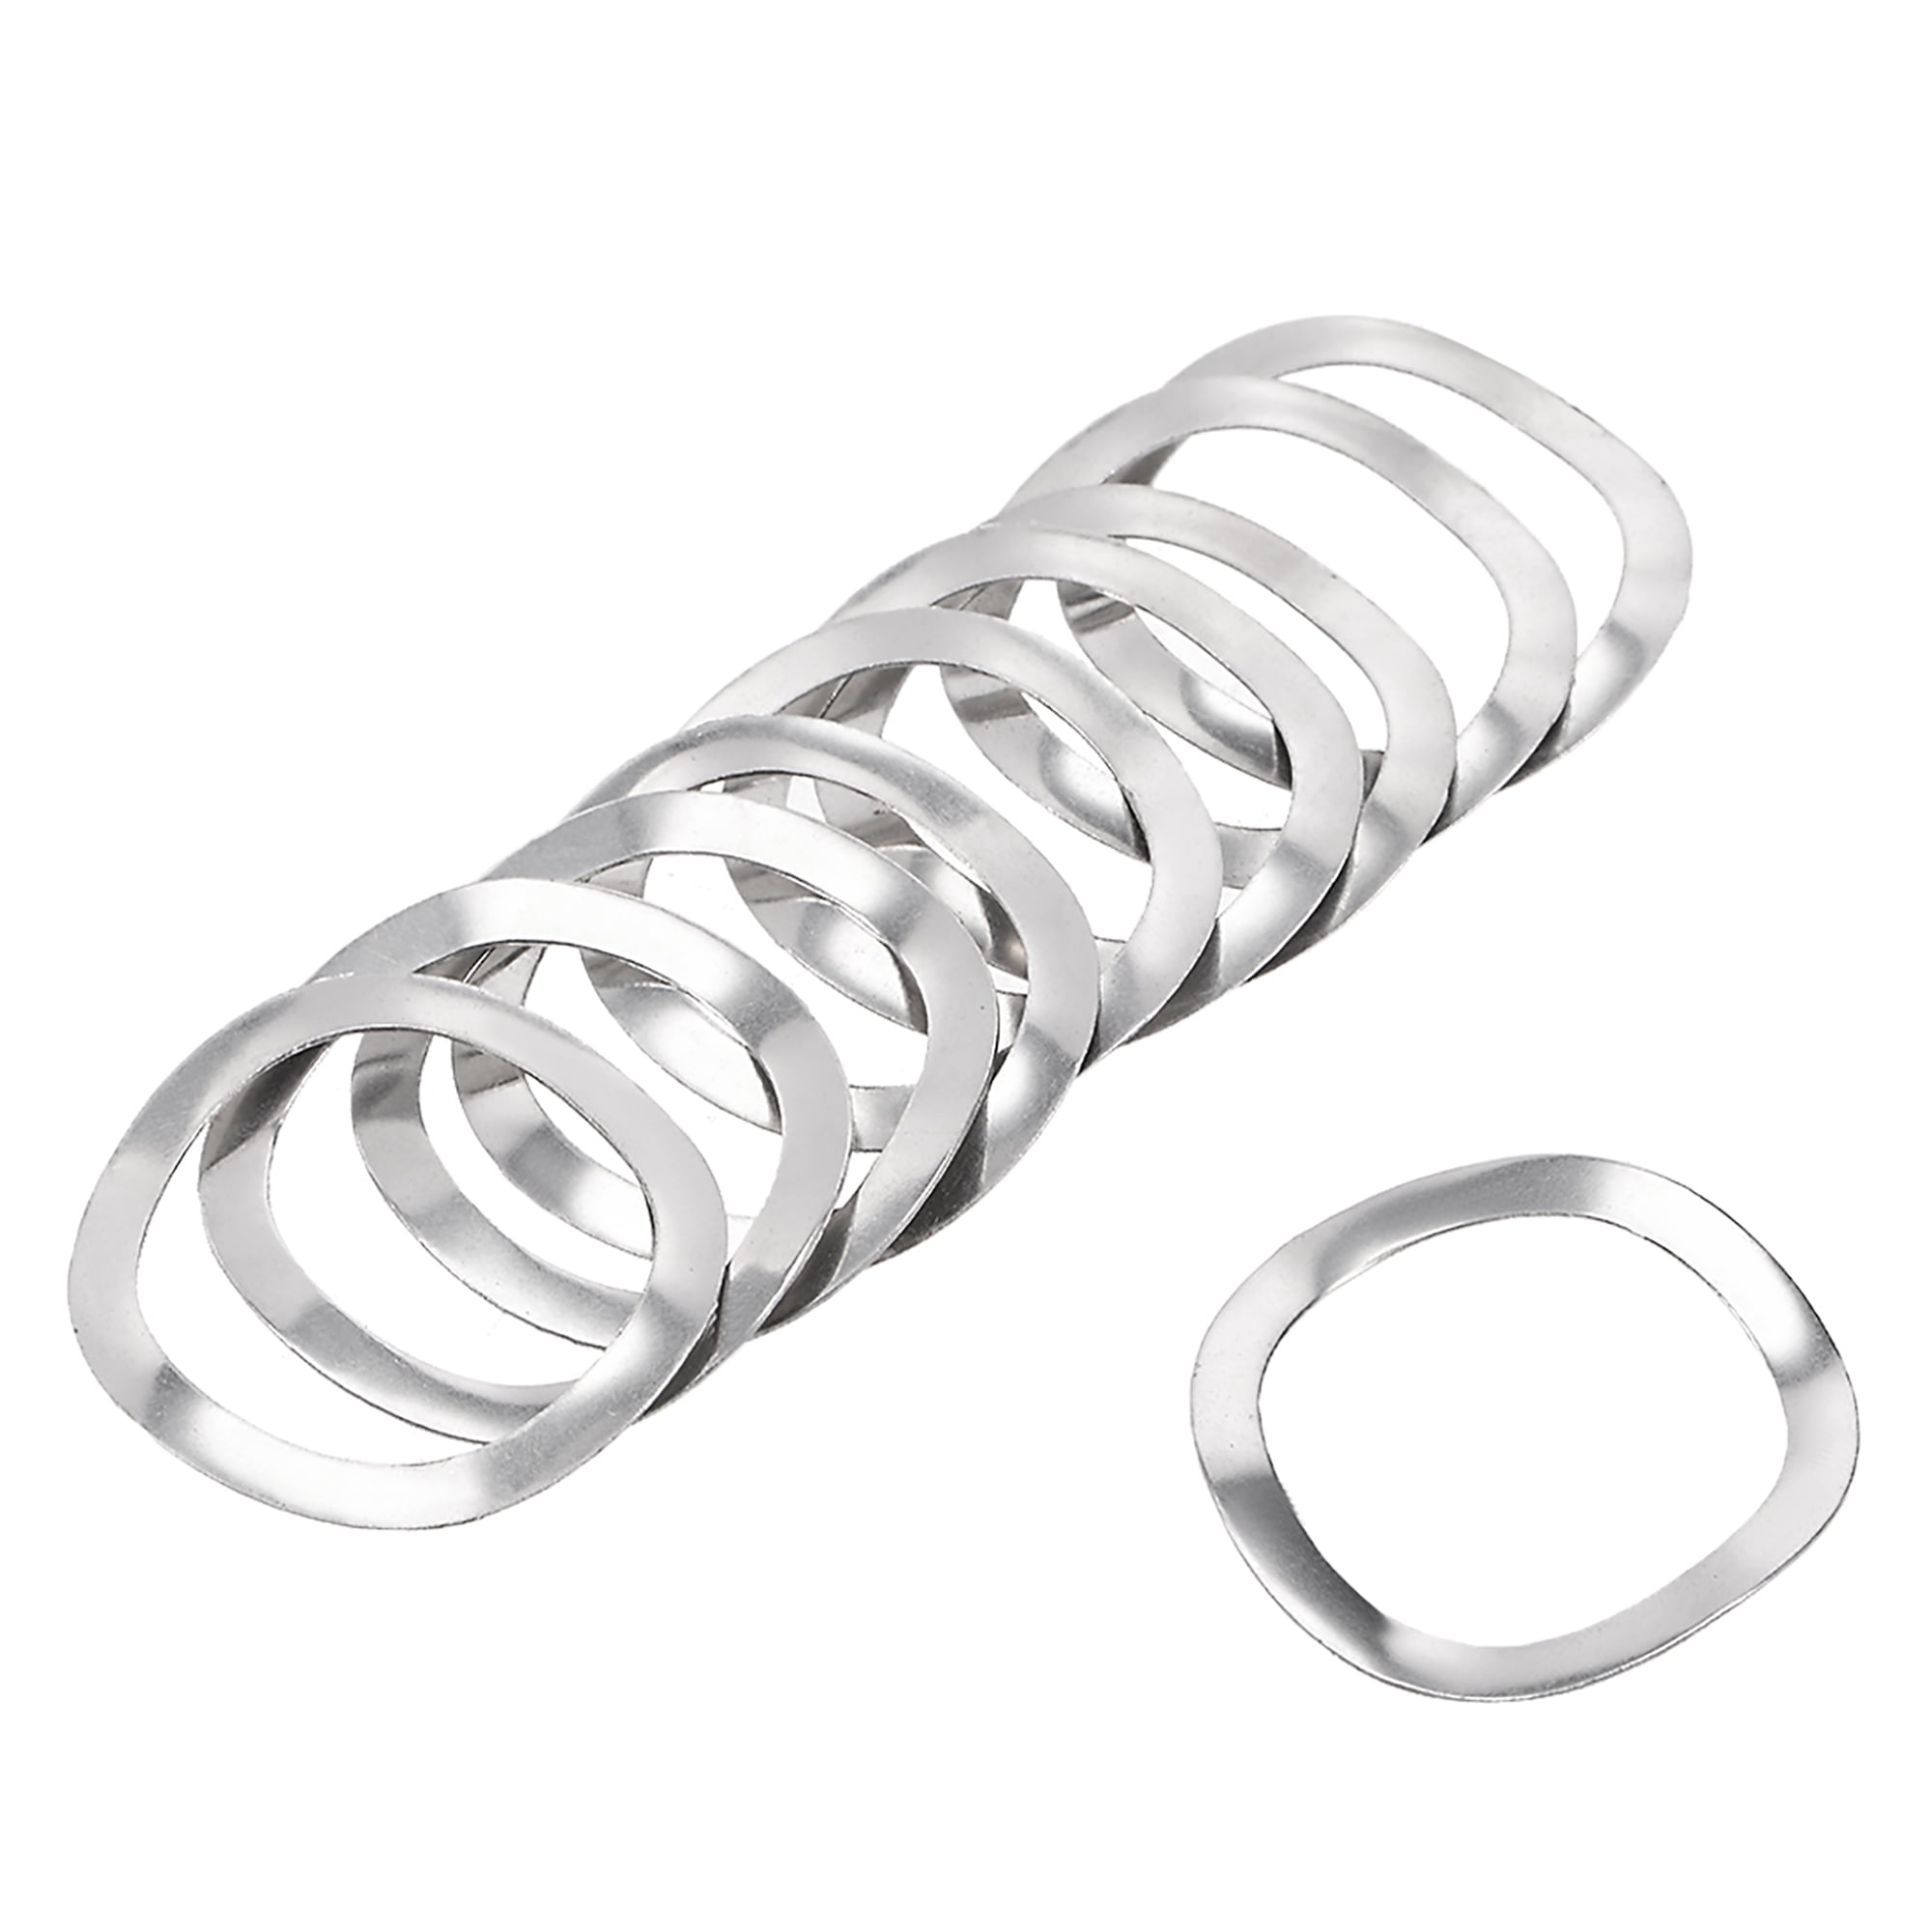 M10 (10mm) CRINKLE WASHERS / WAVY SPRING WASHER STAINLESS A2 - 30 PACK